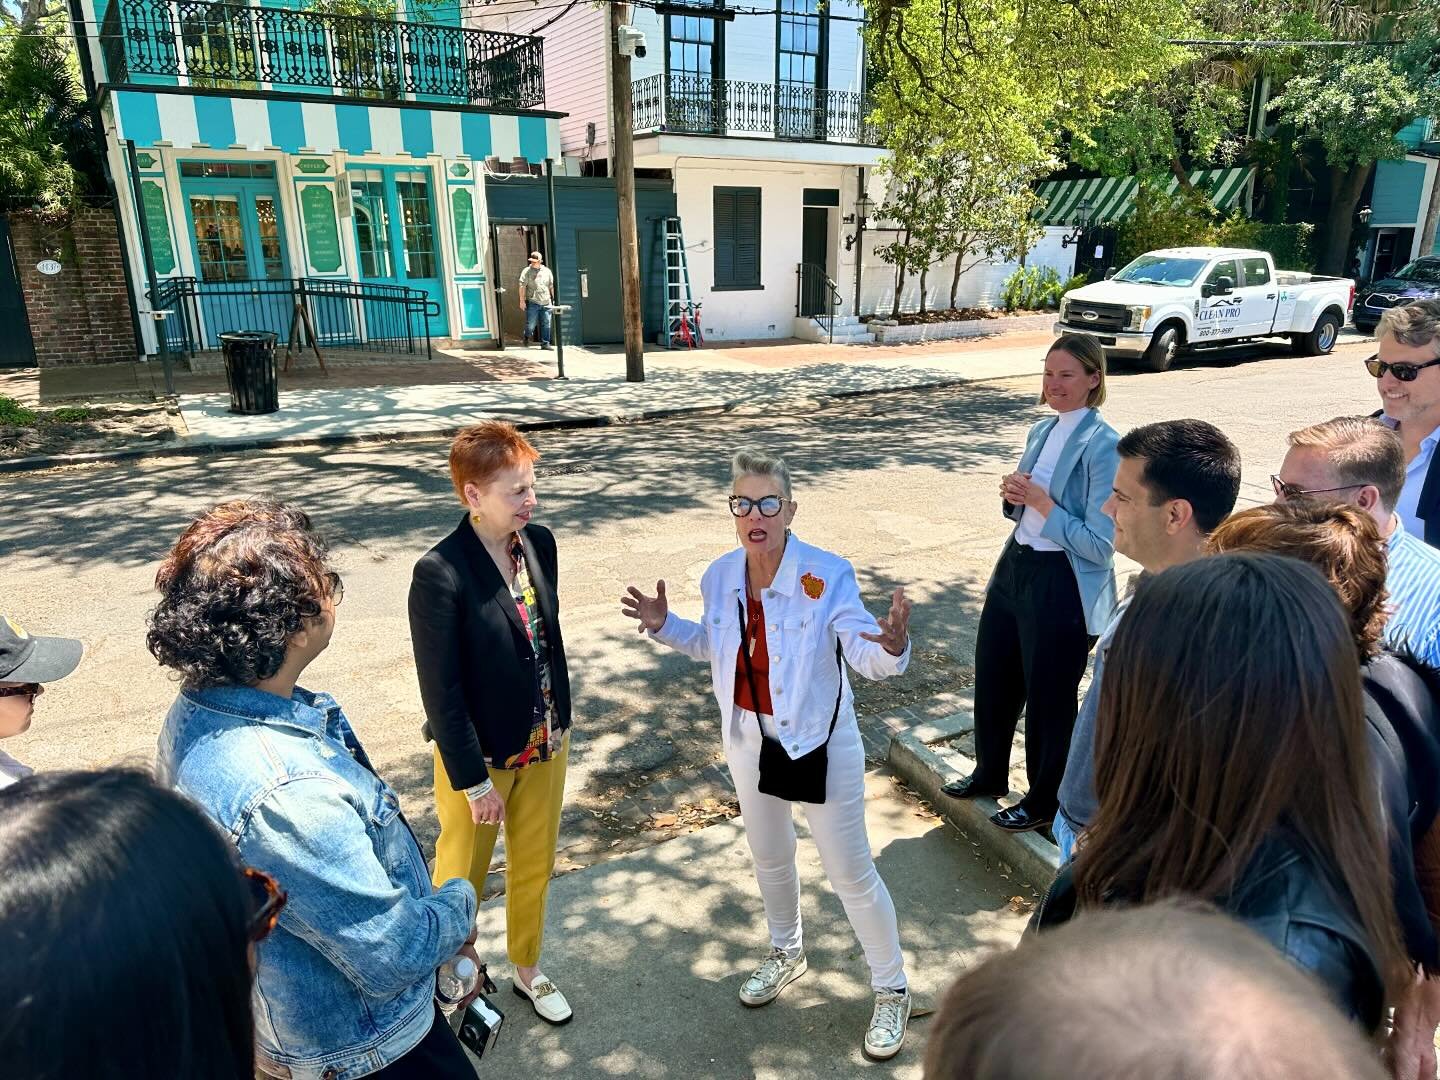 Very honored to have been part of giving a private tour with the incredible @poppytooker today! We met people around the globe from @popeyes - turtle soup at @commanderspalace, talked about Lafayette Cemetery, strolled through the Garden District to 